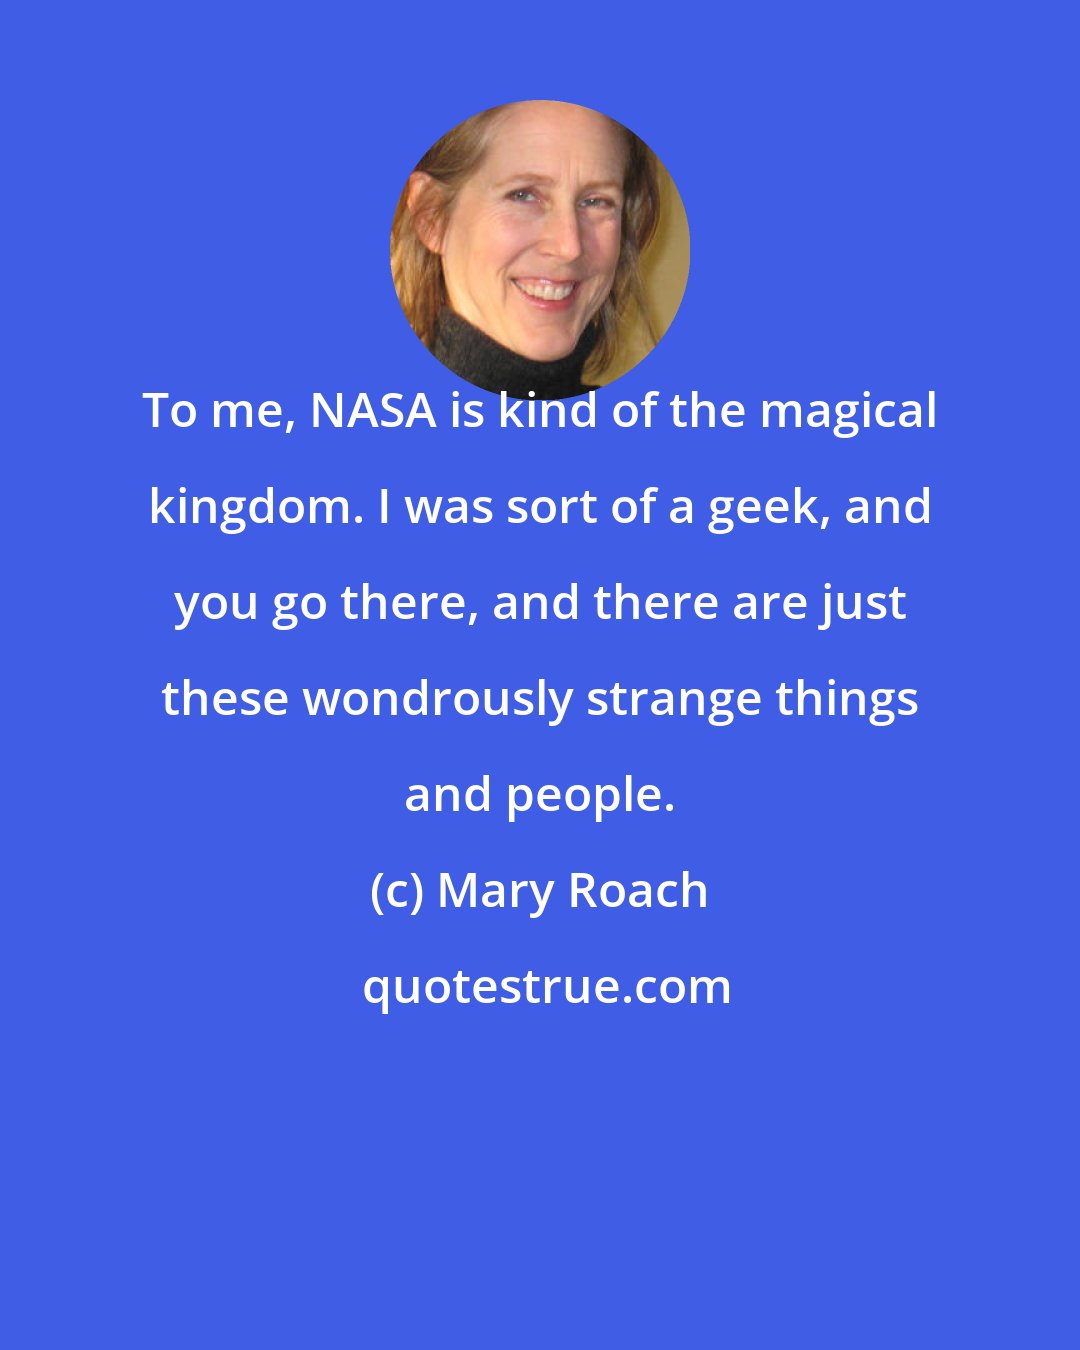 Mary Roach: To me, NASA is kind of the magical kingdom. I was sort of a geek, and you go there, and there are just these wondrously strange things and people.